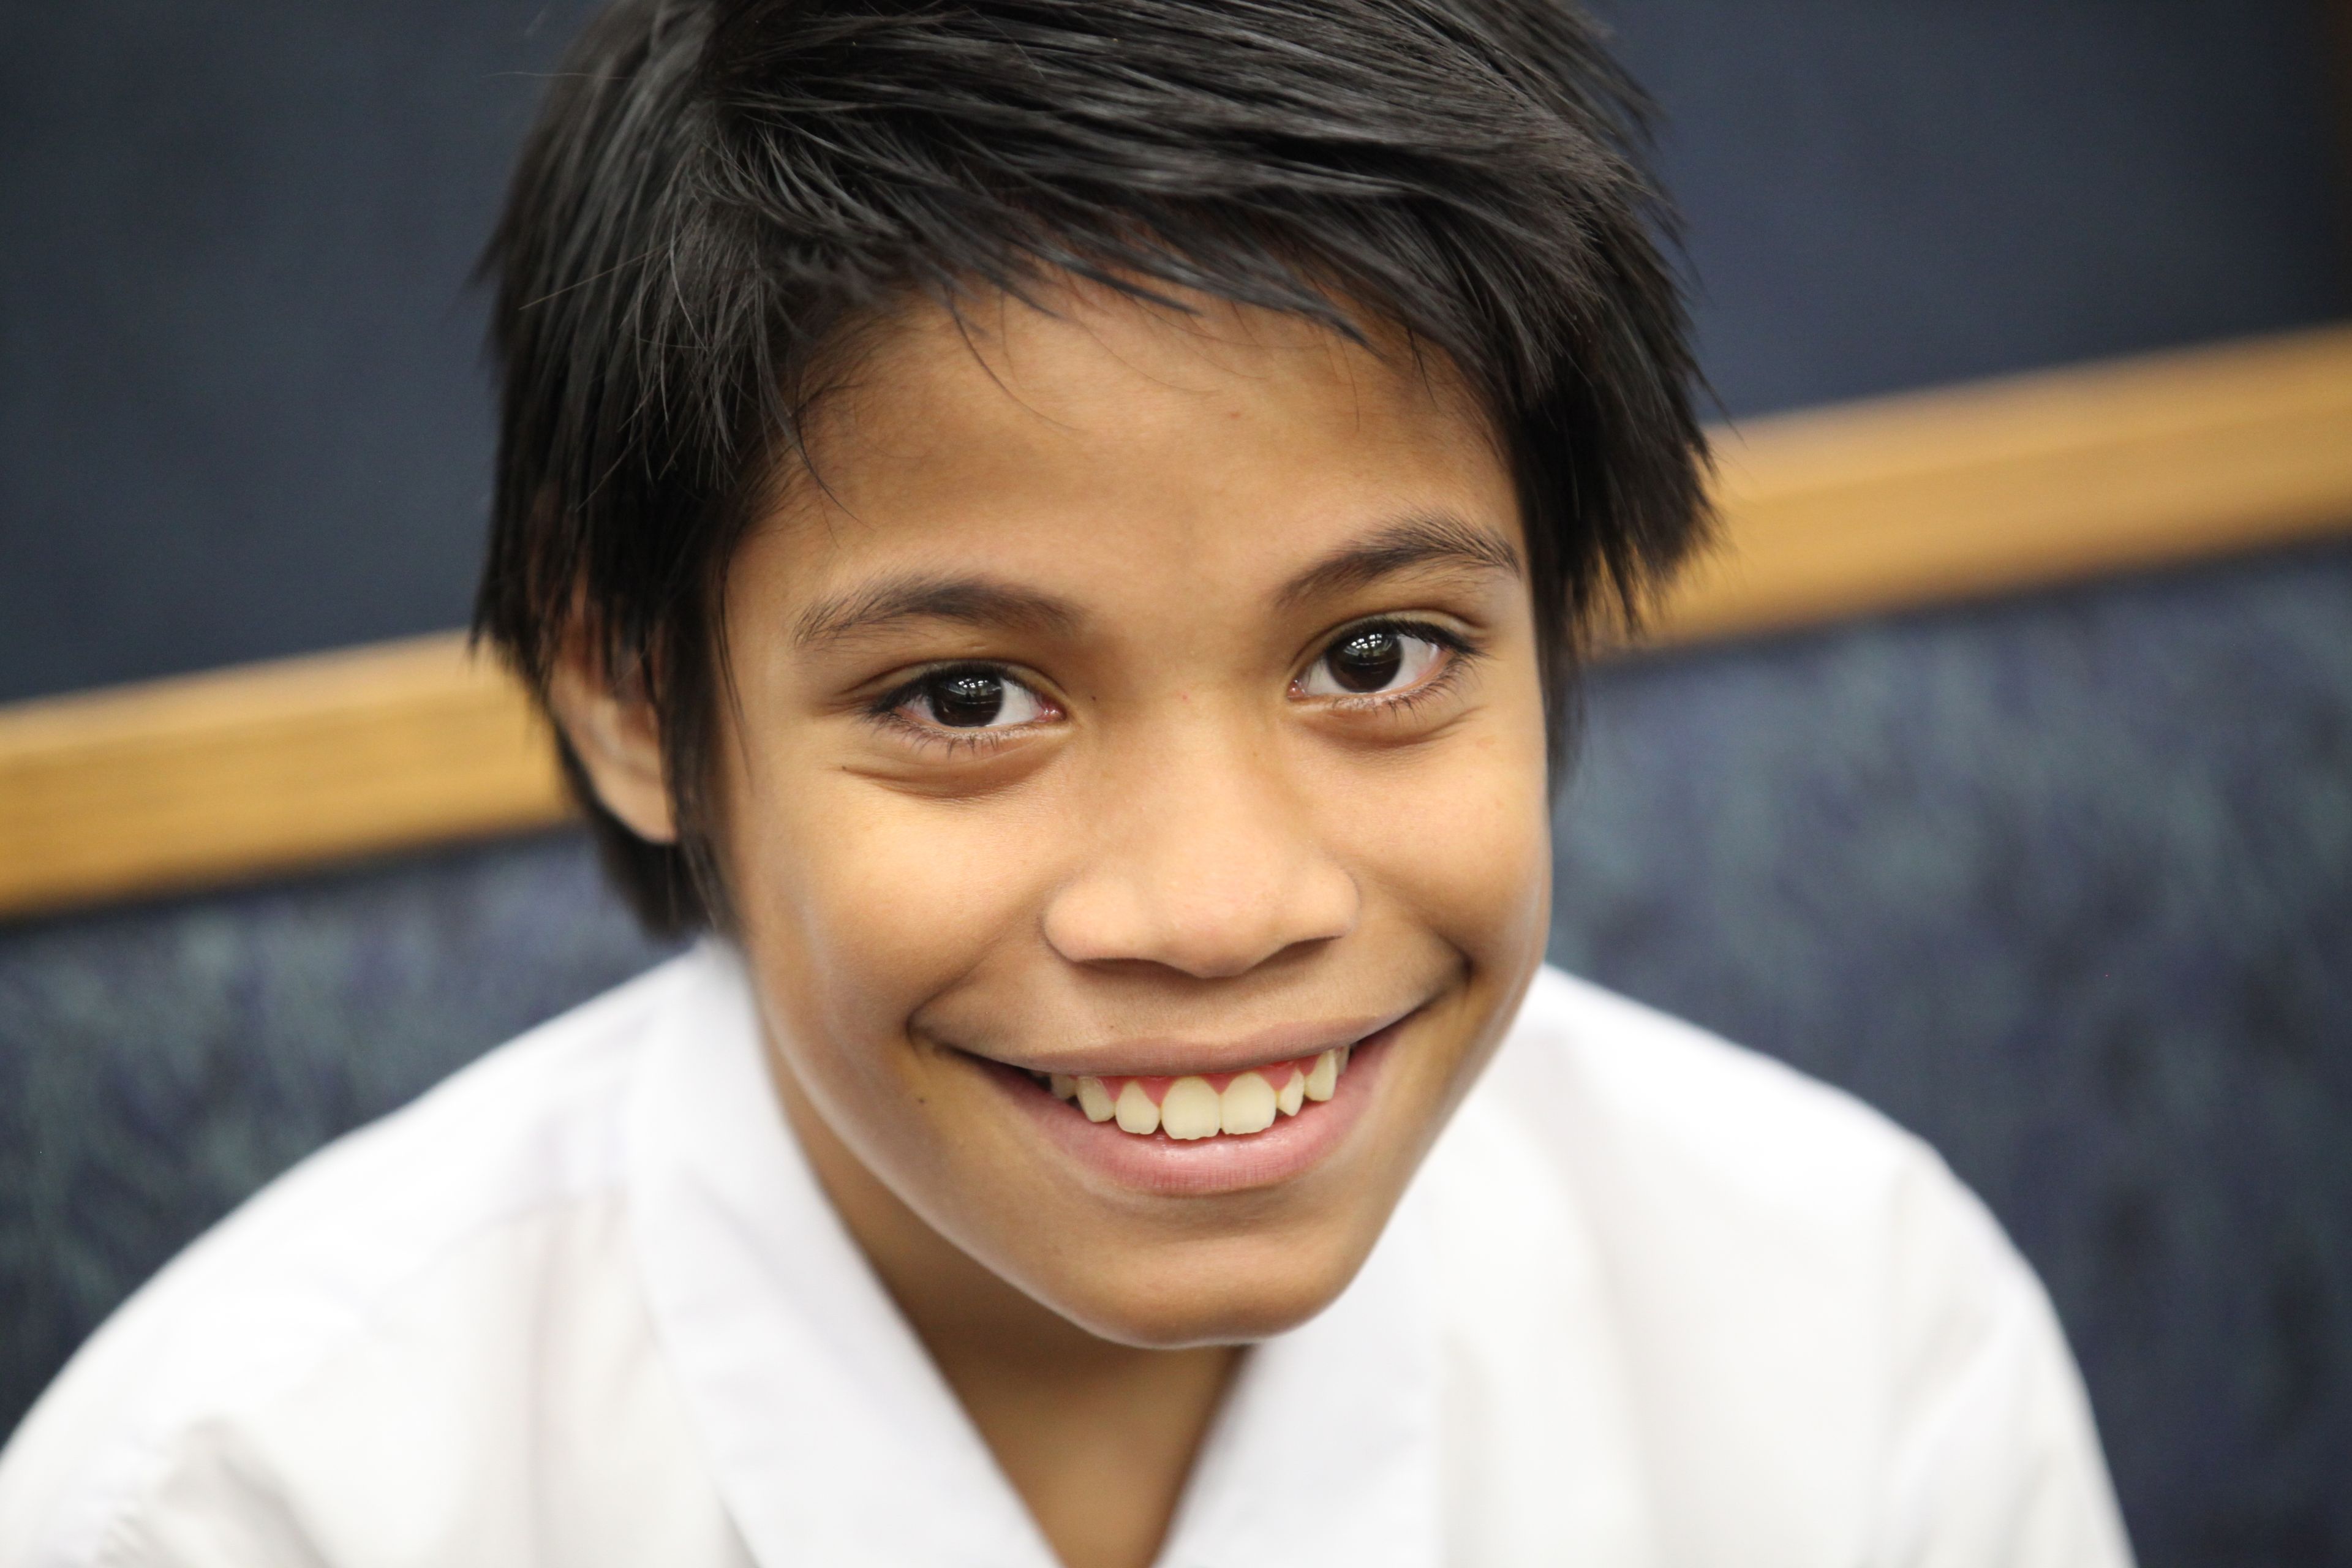 A young boy smiling dressed in church clothes.